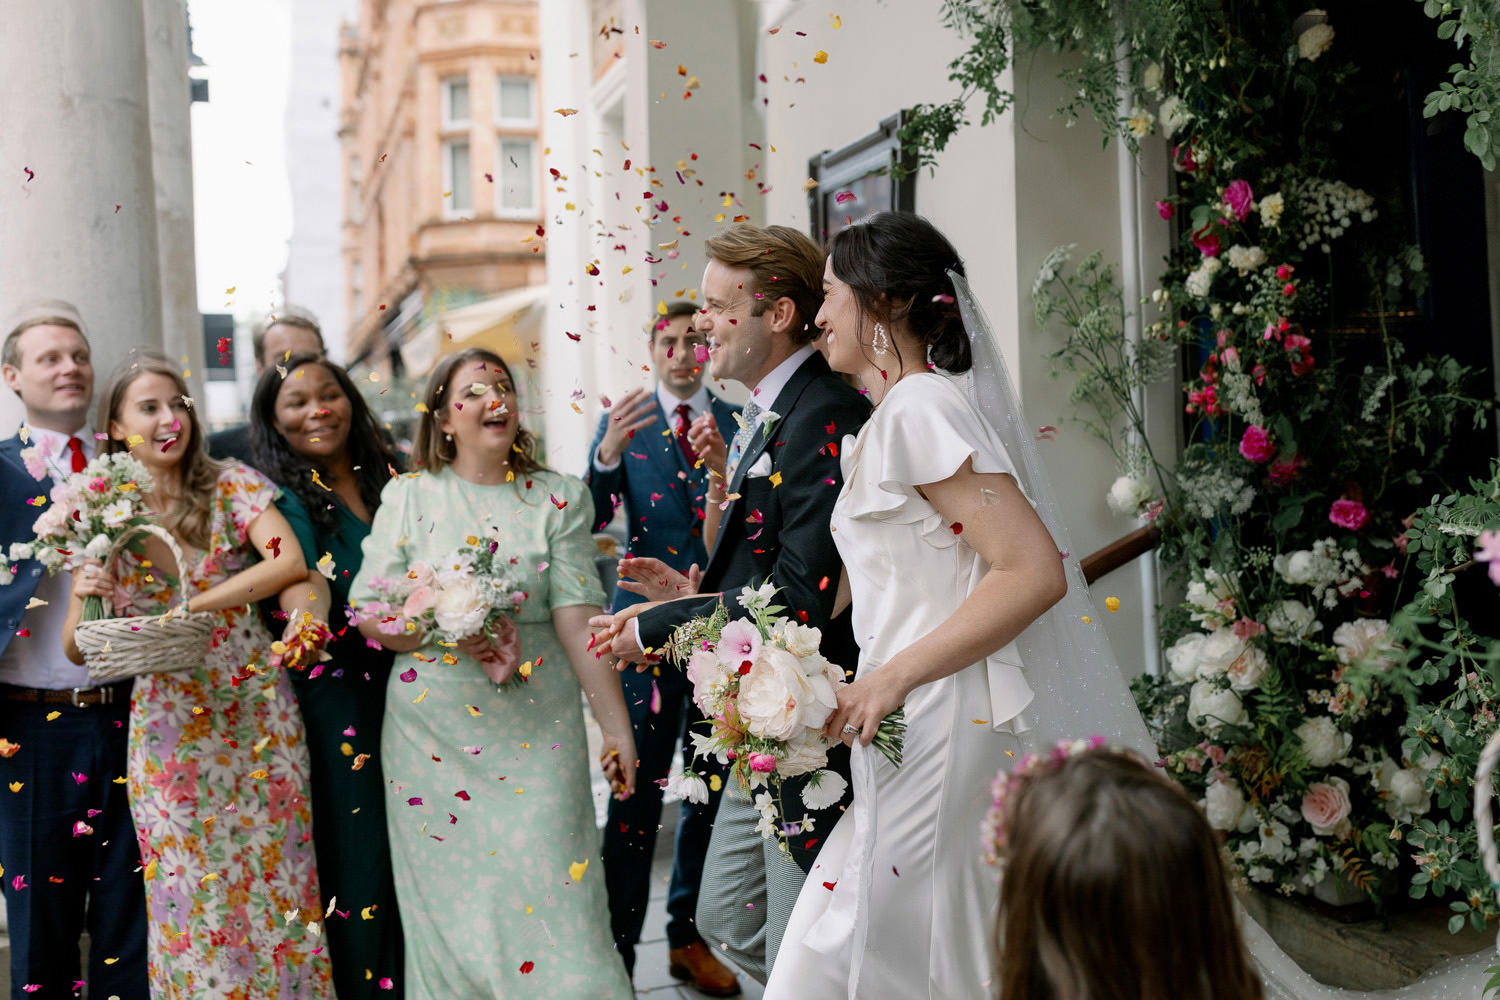 confetti being thrown over a smiling bride and groom